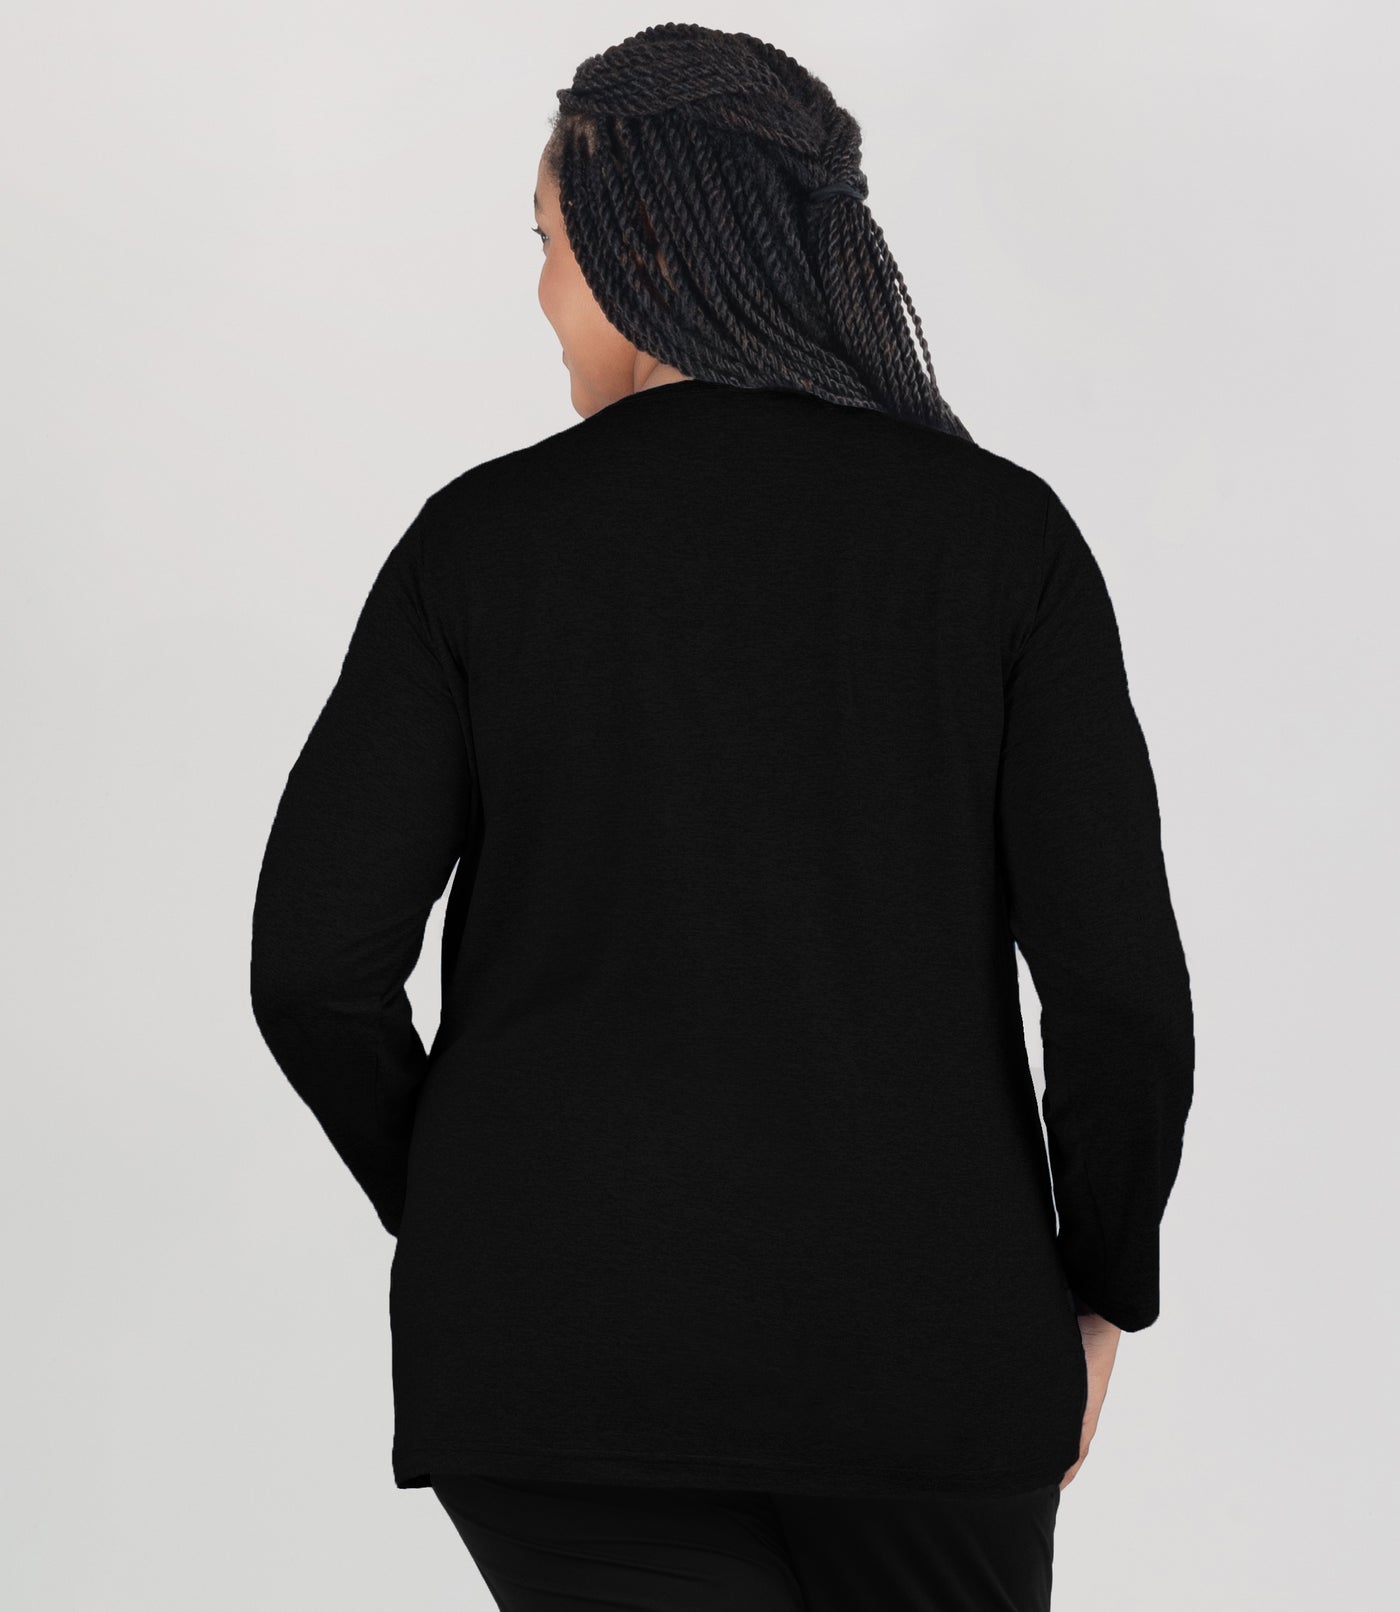 Model, facing back, wearing JunoActive's Softwick Long Sleeve Crew Neck Top in color black.